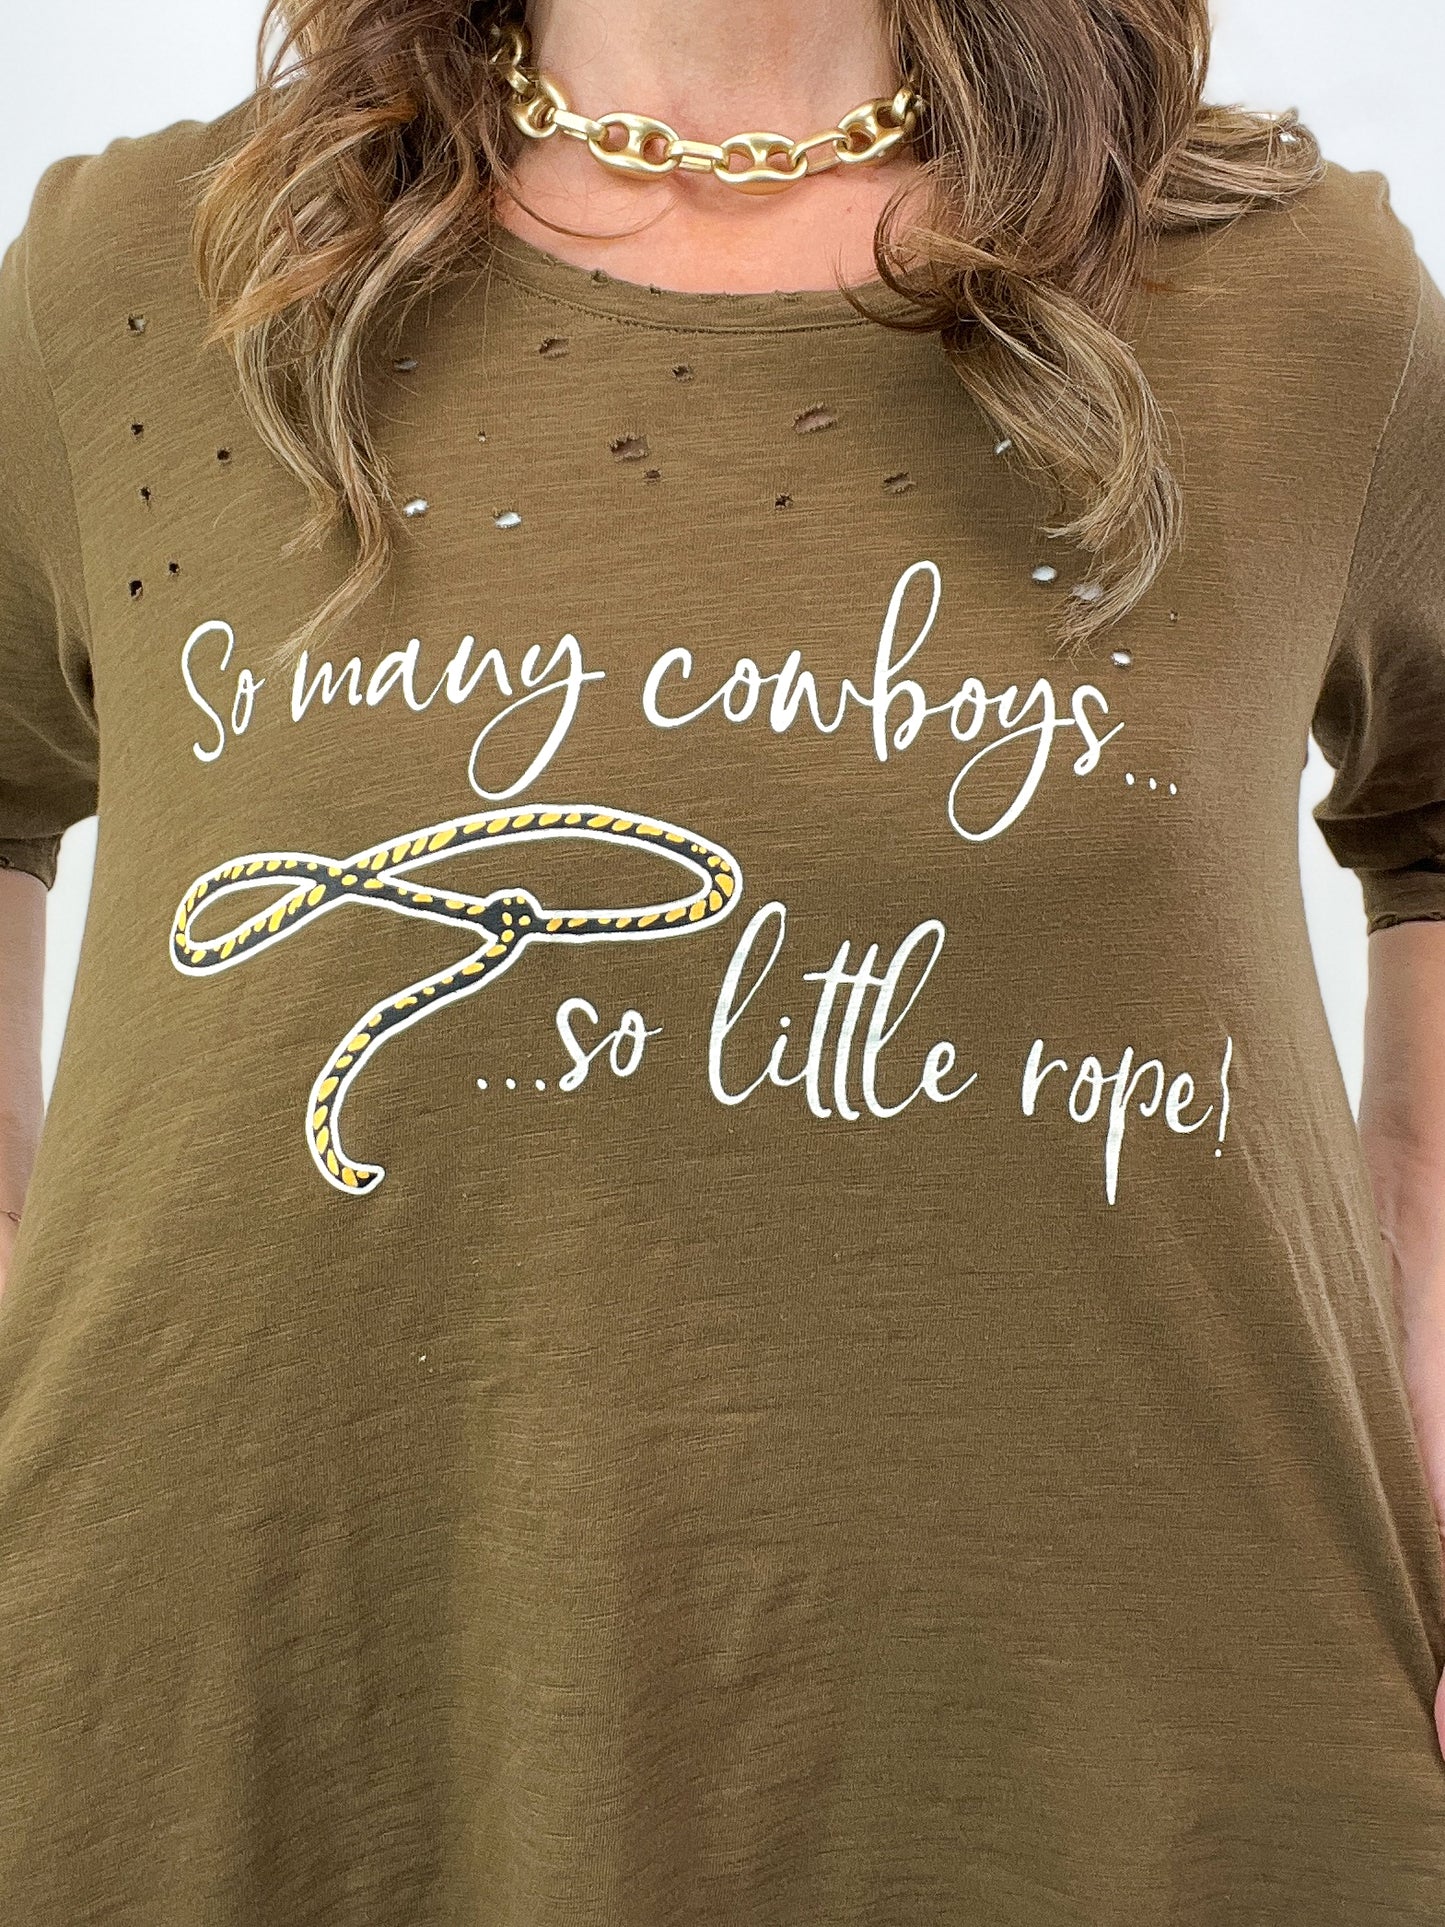 Too Many Cowboys Graphic Tee